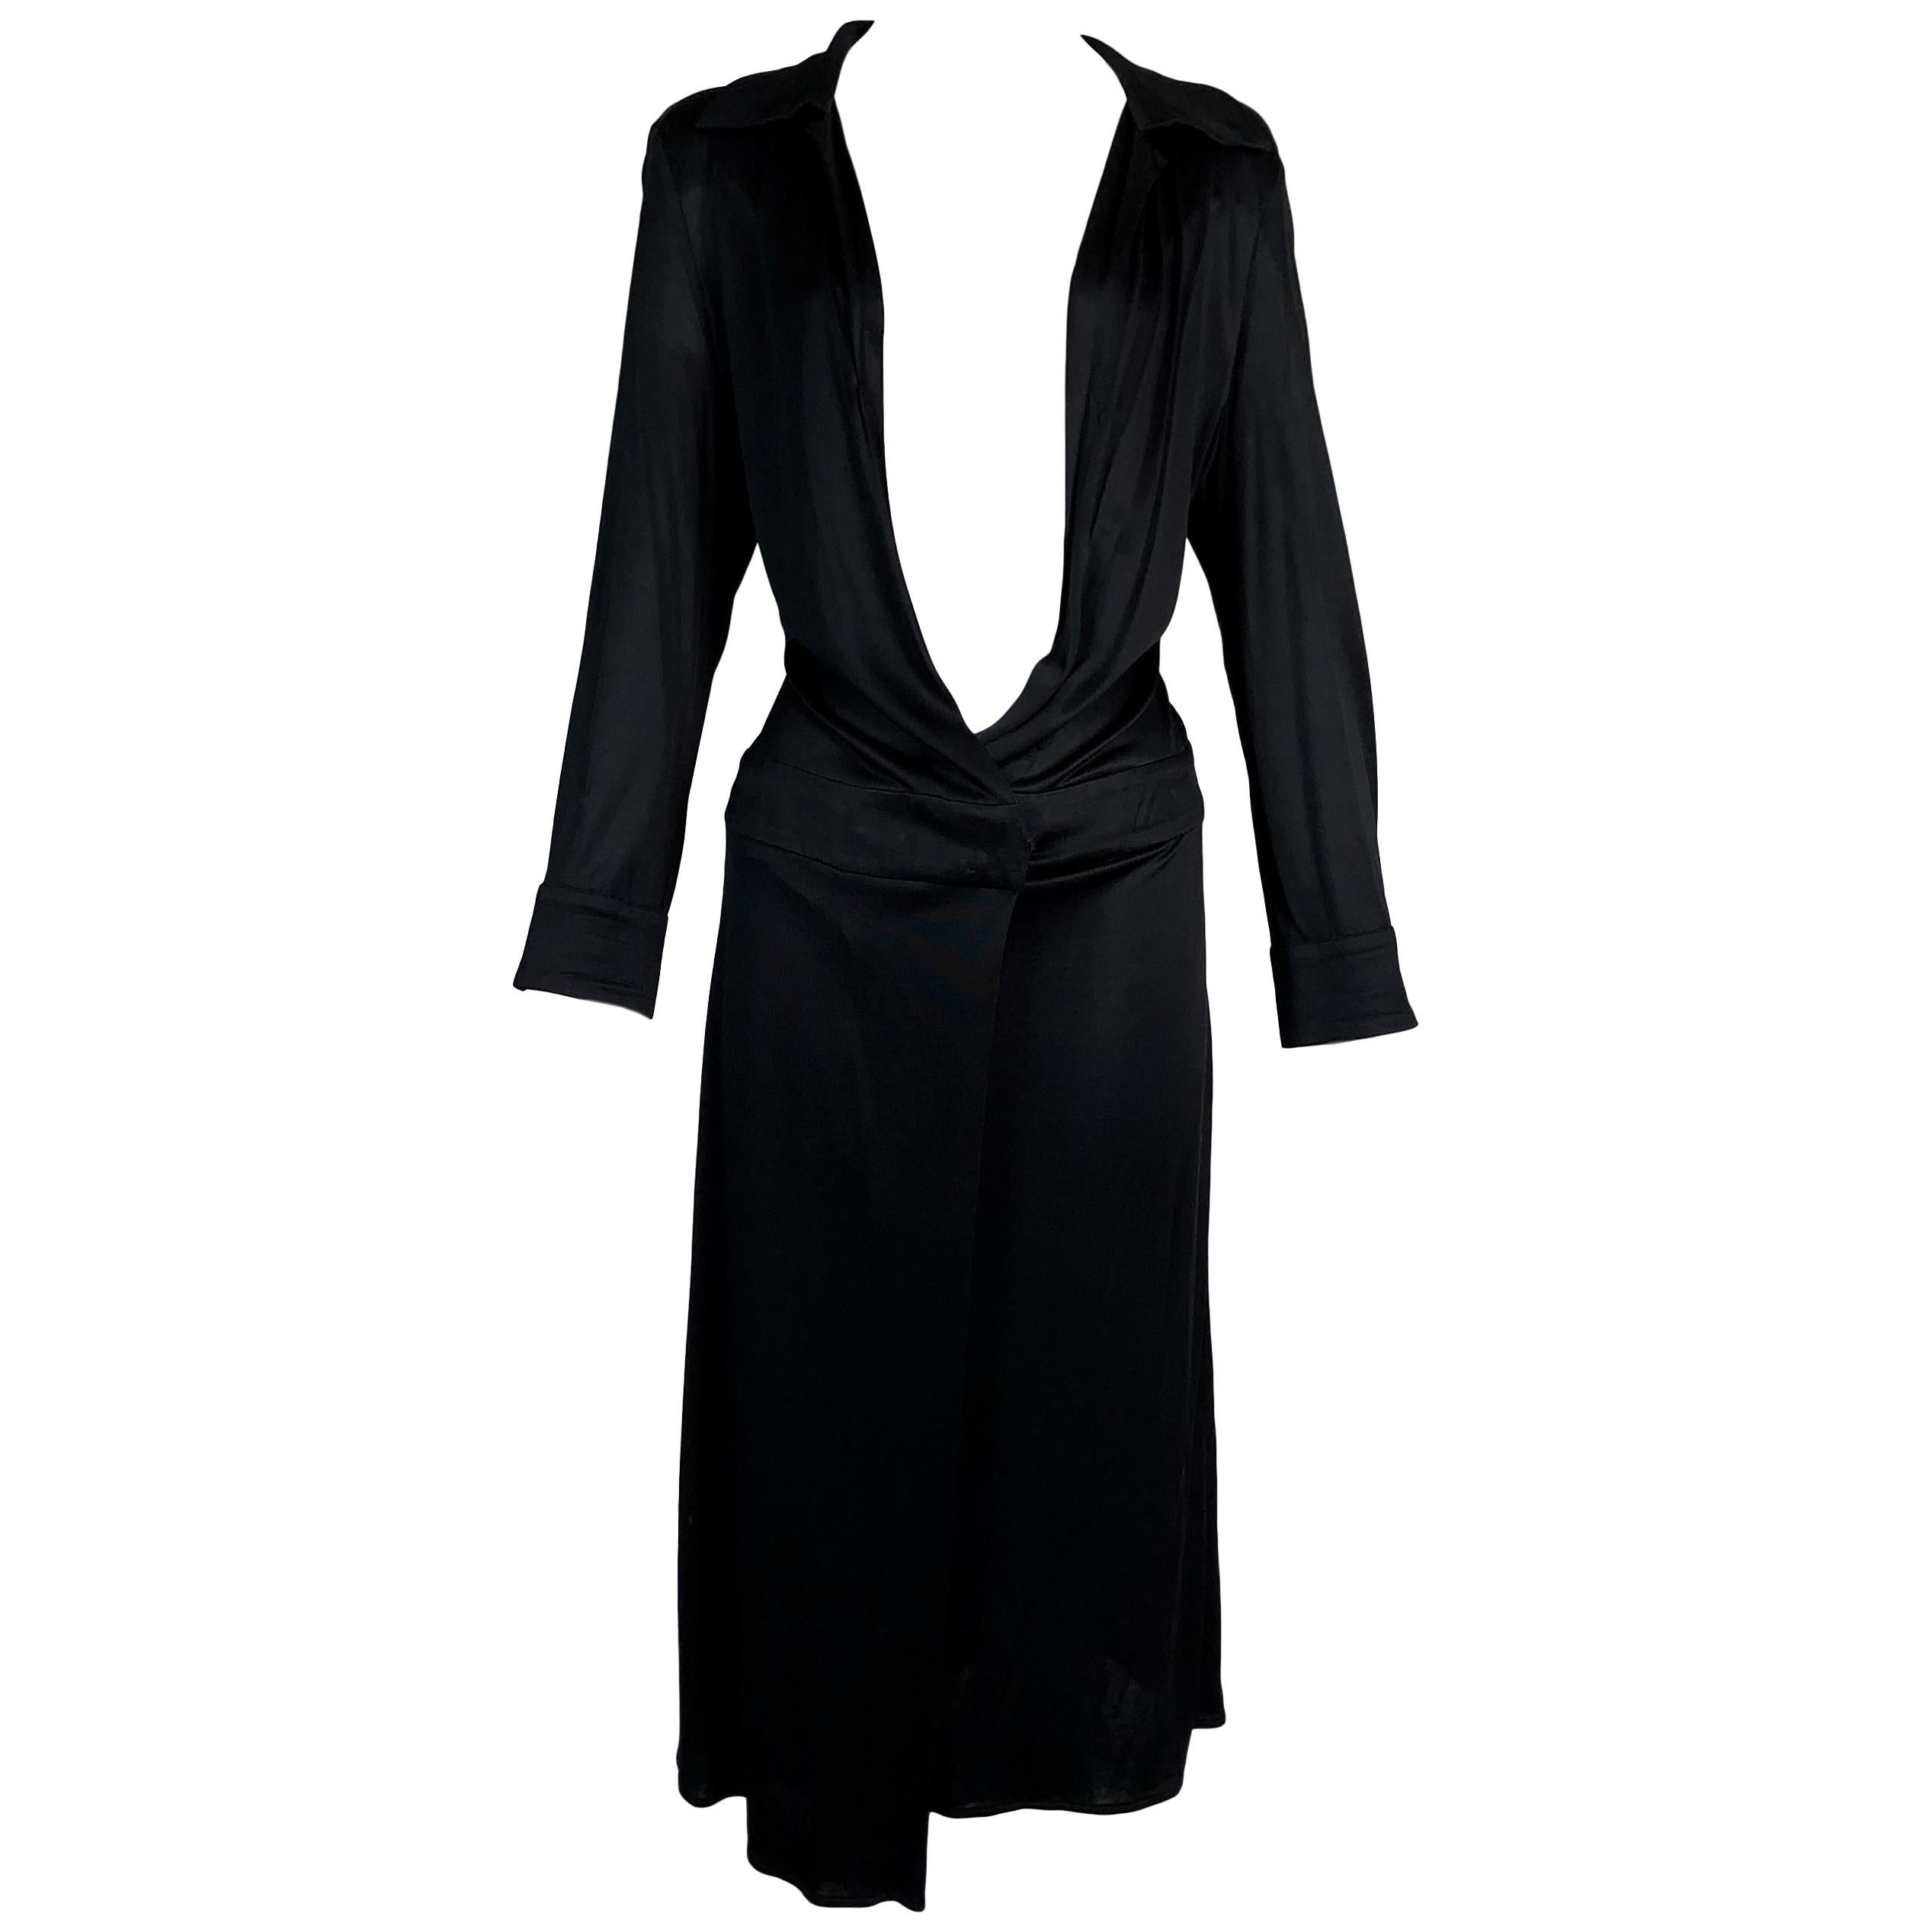 S/S 2000 Gucci Tom Ford Runway Plunging Open Chest Black L/S Dress